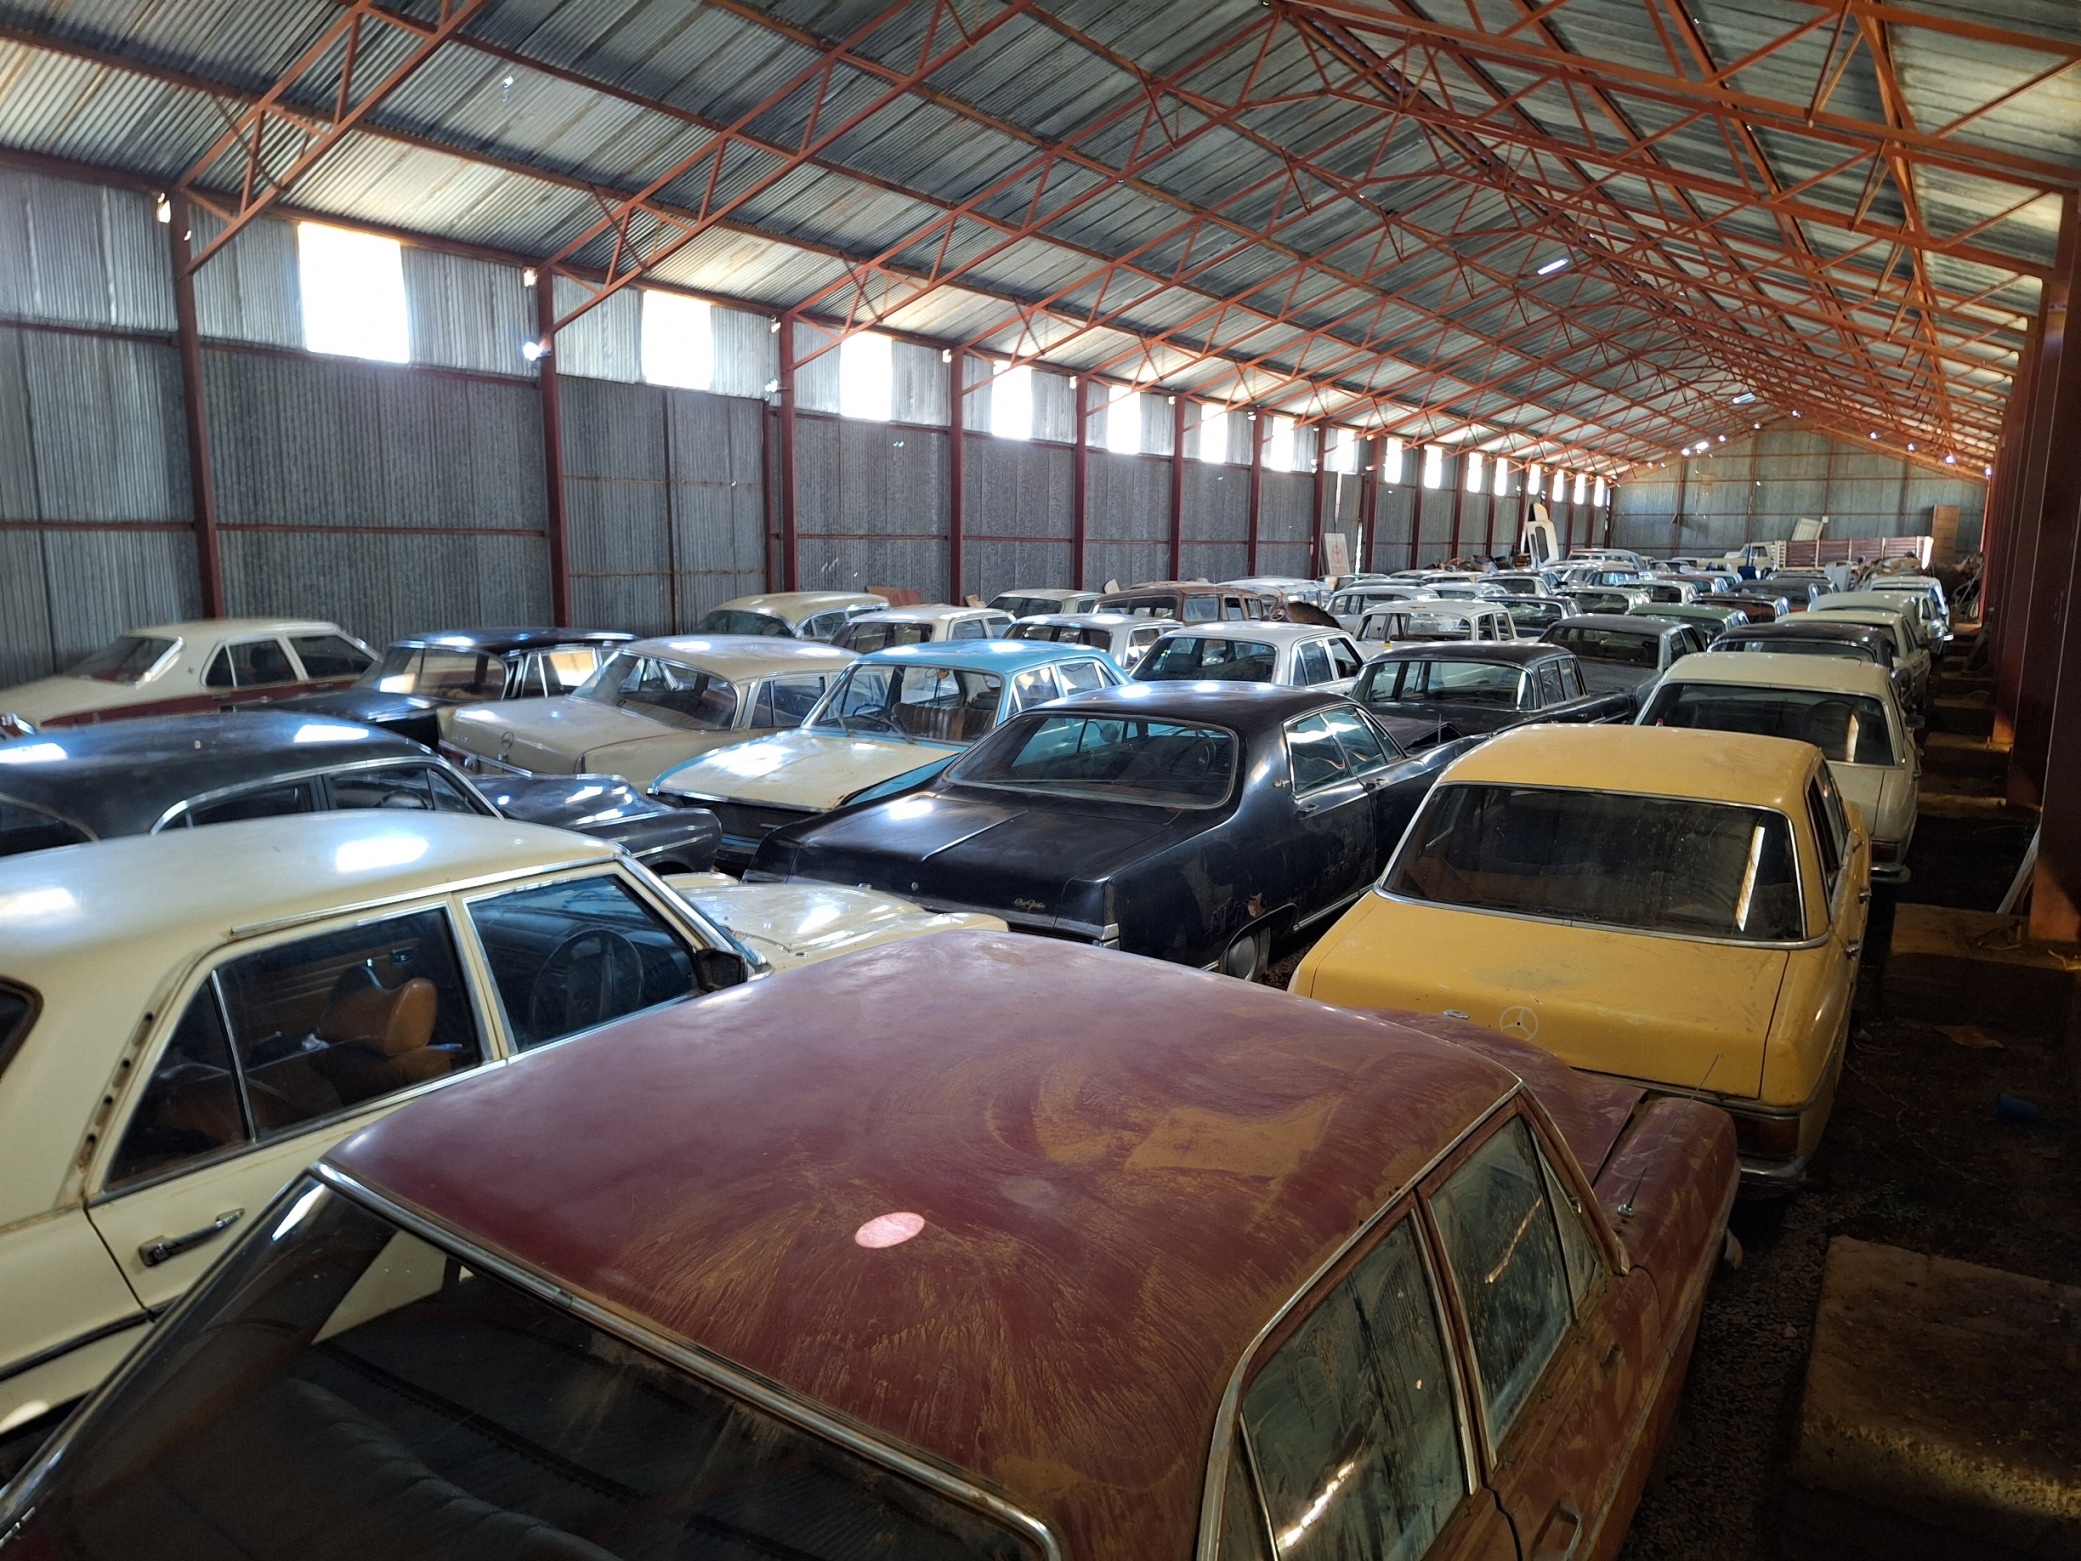 Louis Coetzer lost barn find online auction puts South African classics on world map.